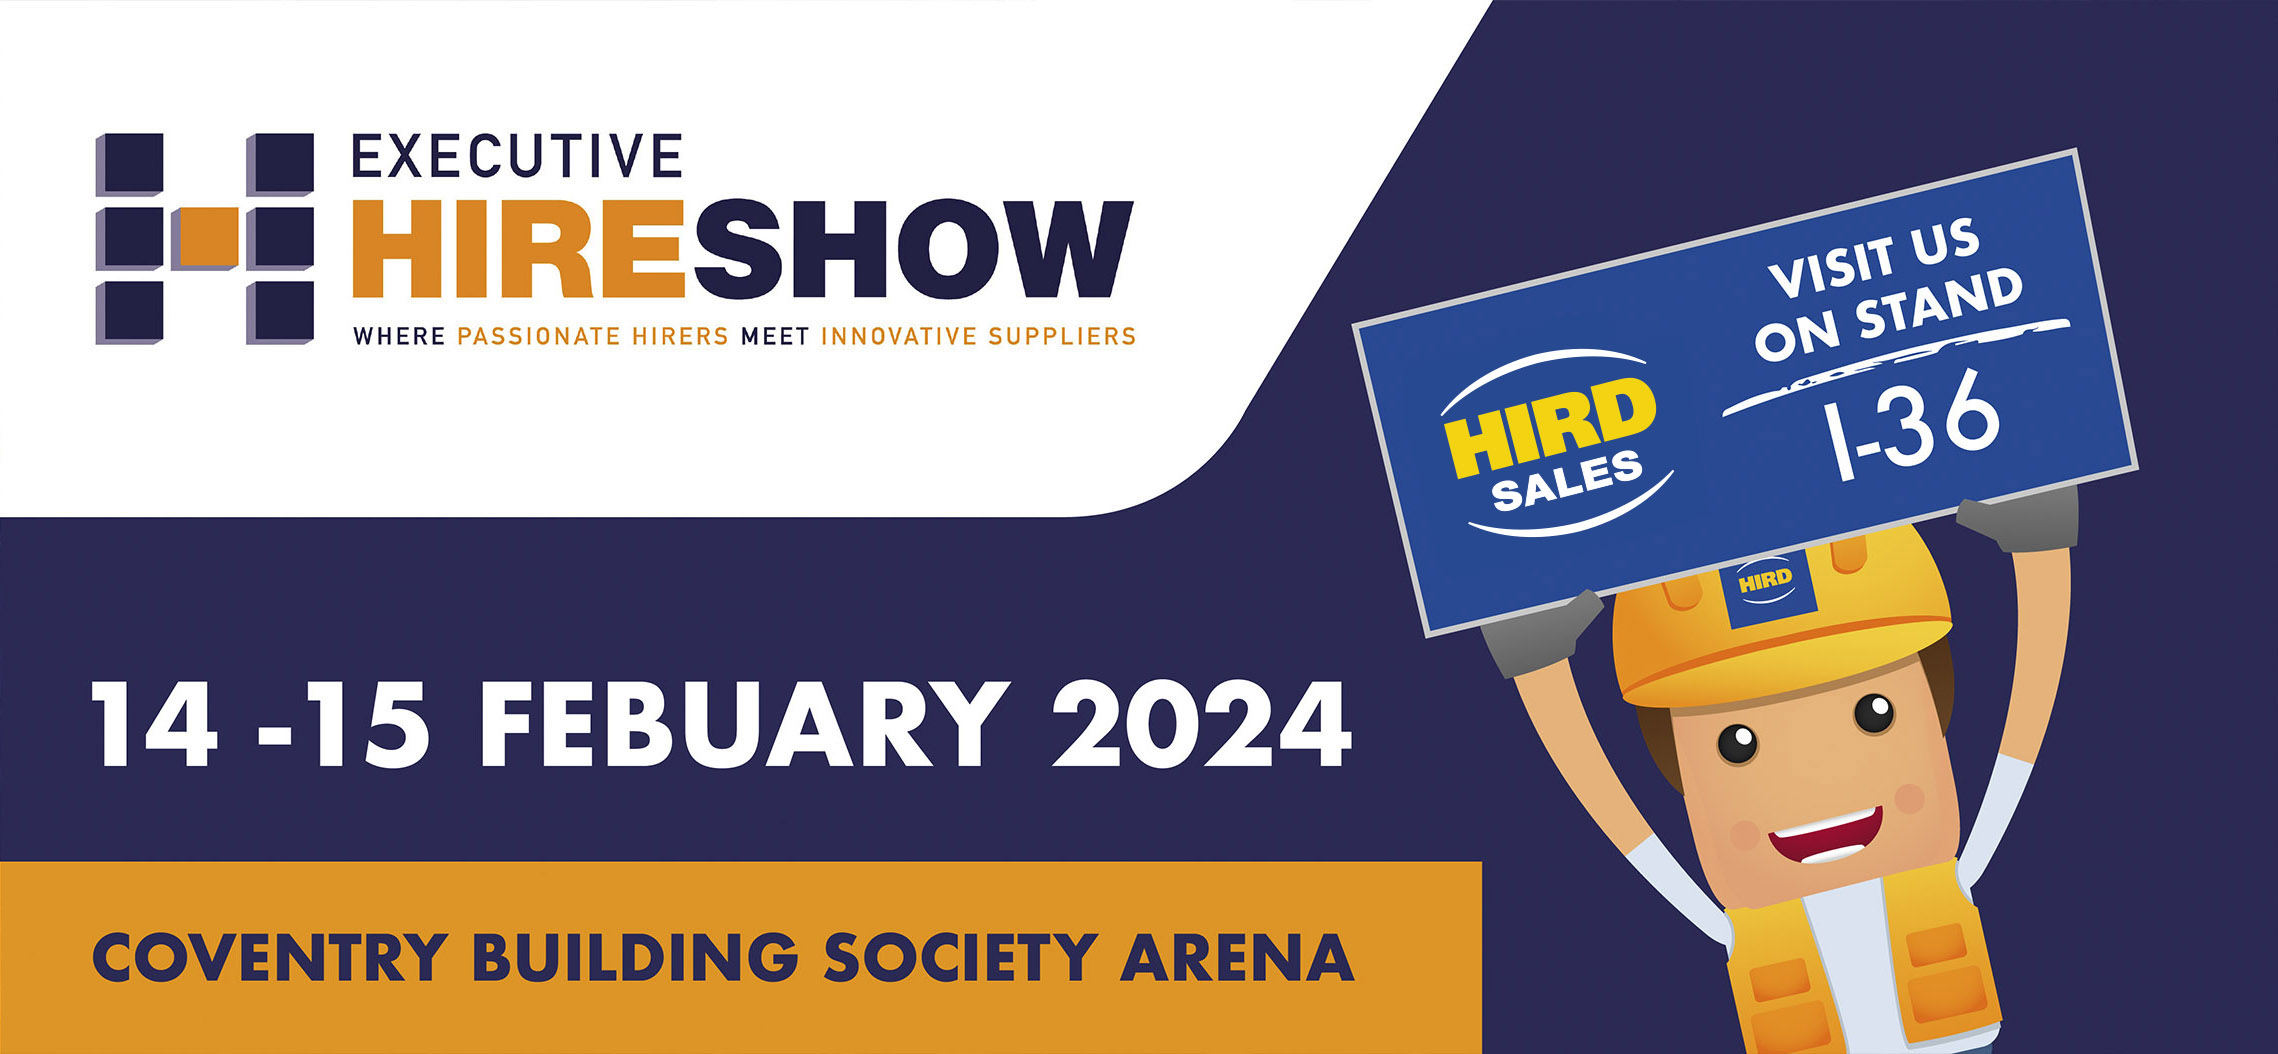 Hird Sales at the Executive Hire Show - Coventry - 2024 - hero